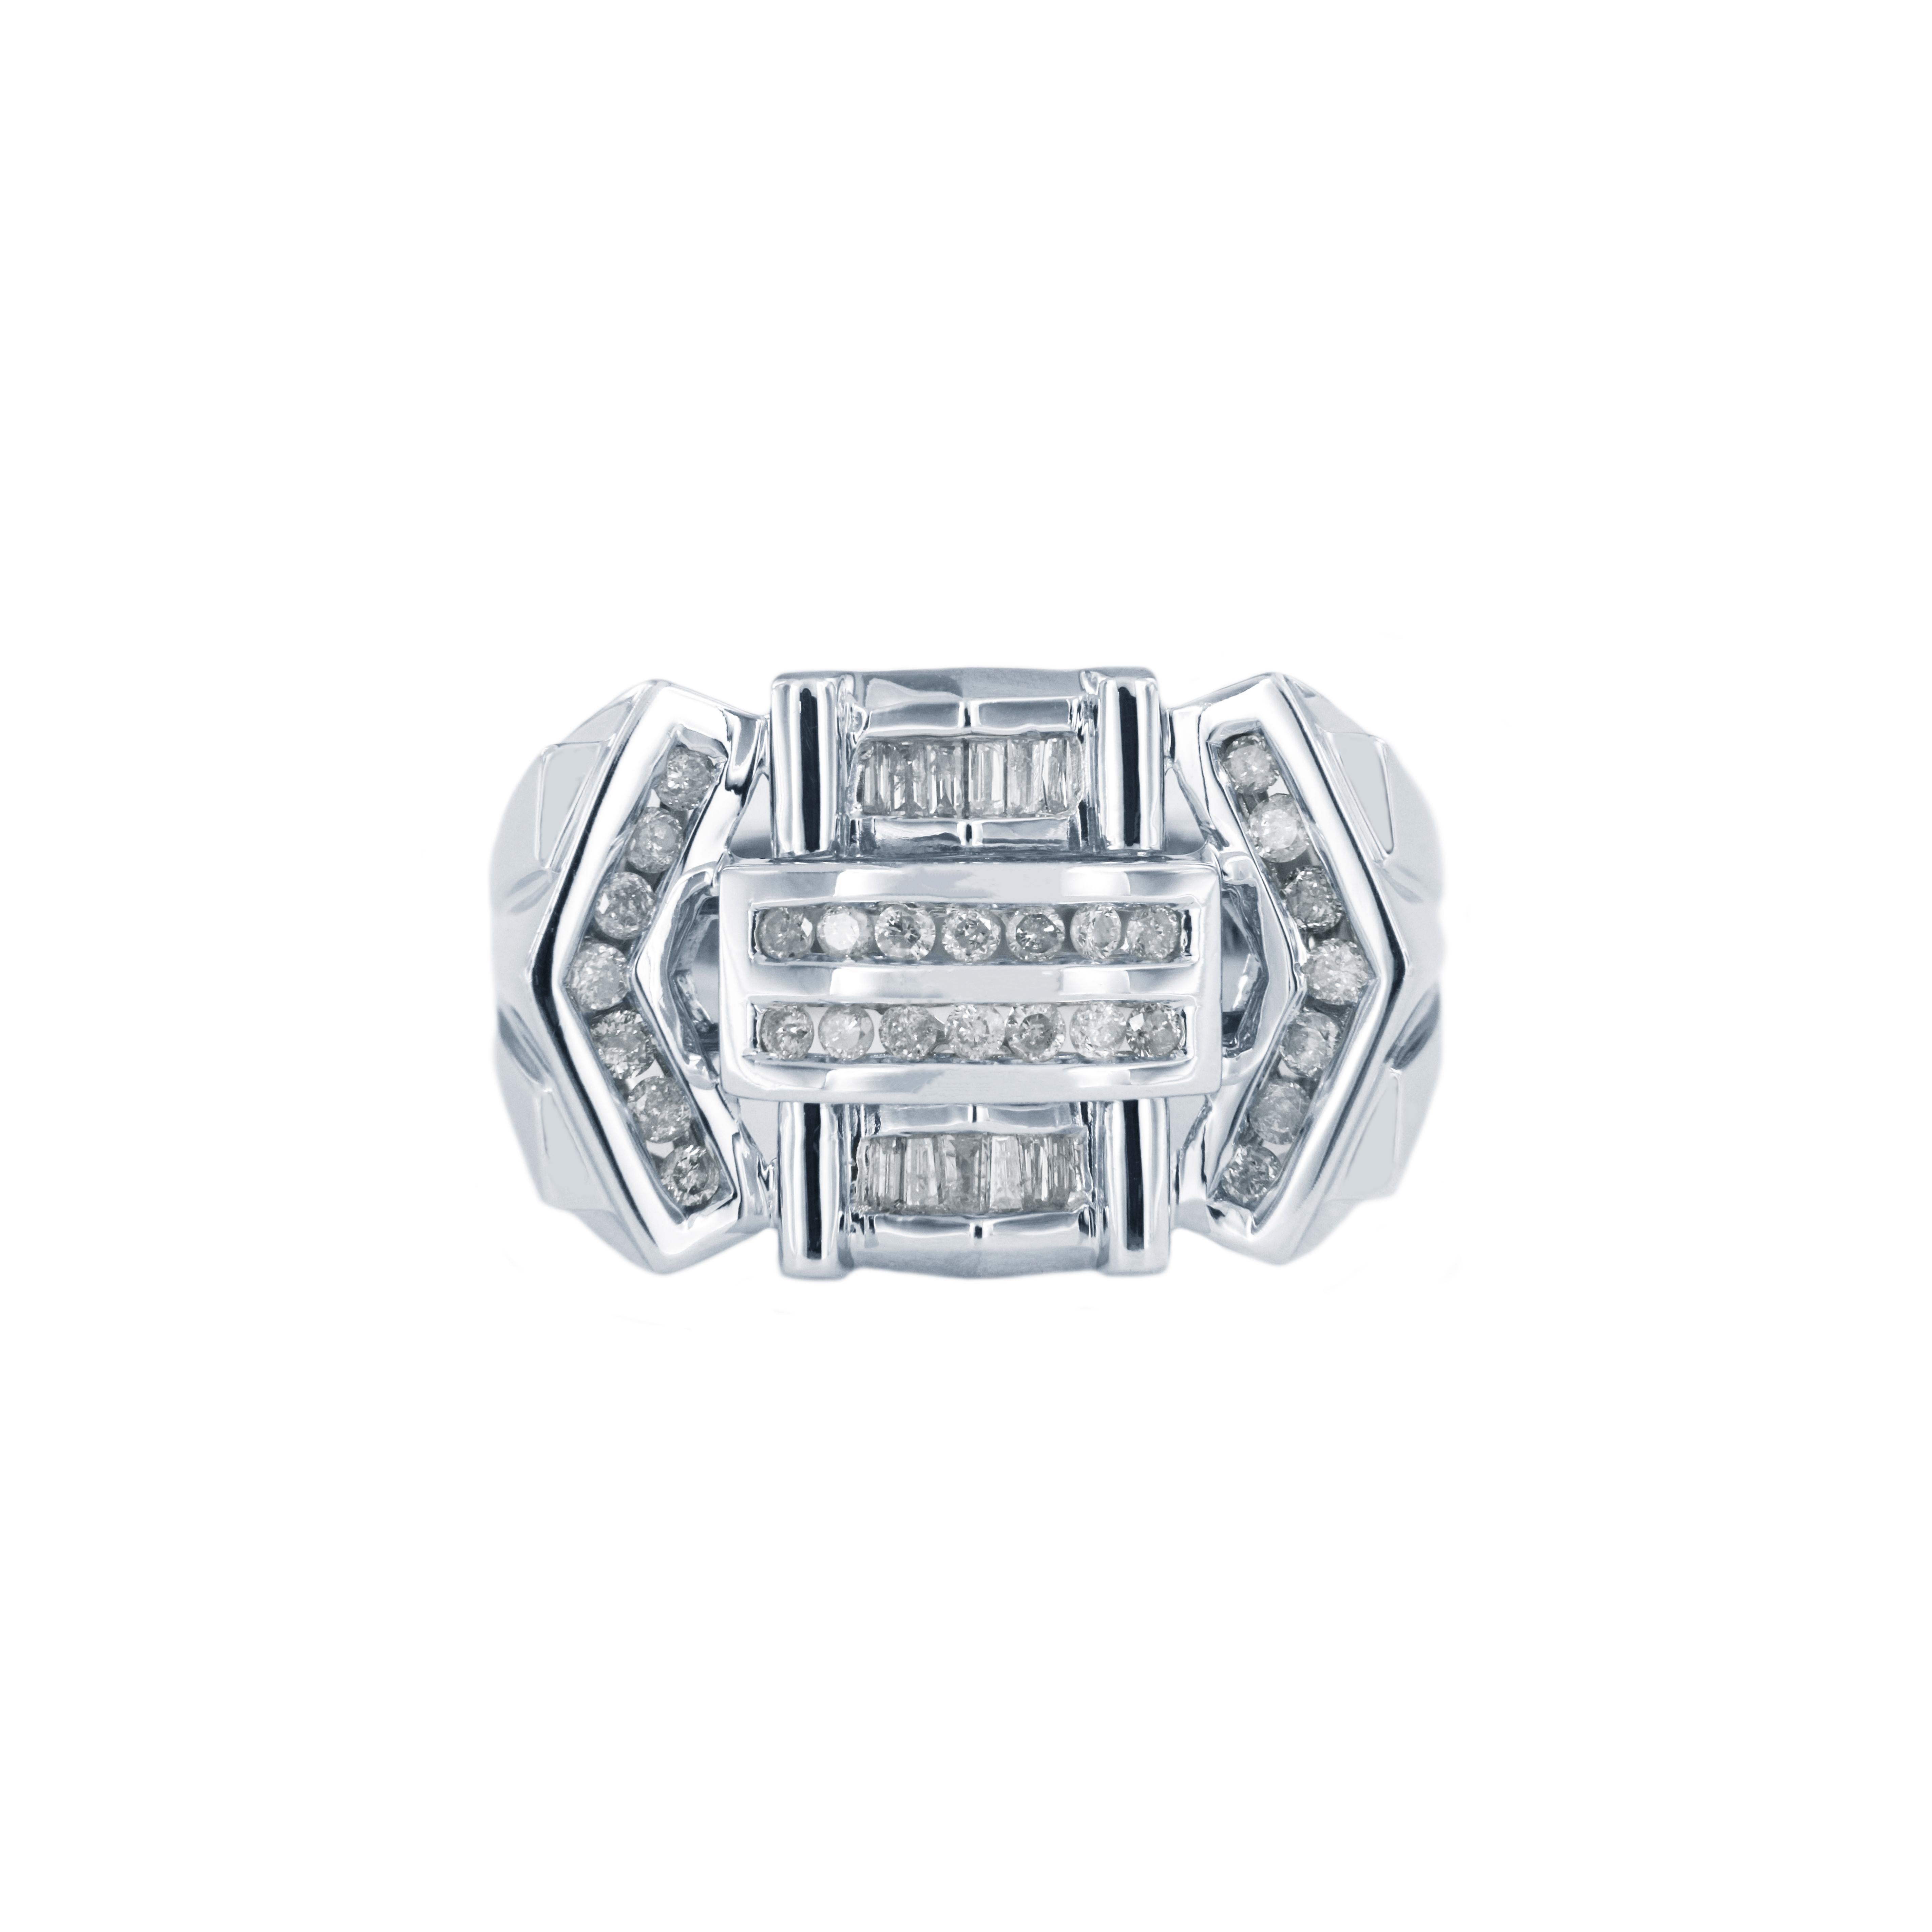 -Custom made

-14k White gold

-Ring size: 9.75

-Weight: 11gr

-Ornament dimension: 0.6-0.9”

-Diamond: 1.5ct, VS clarity, G color